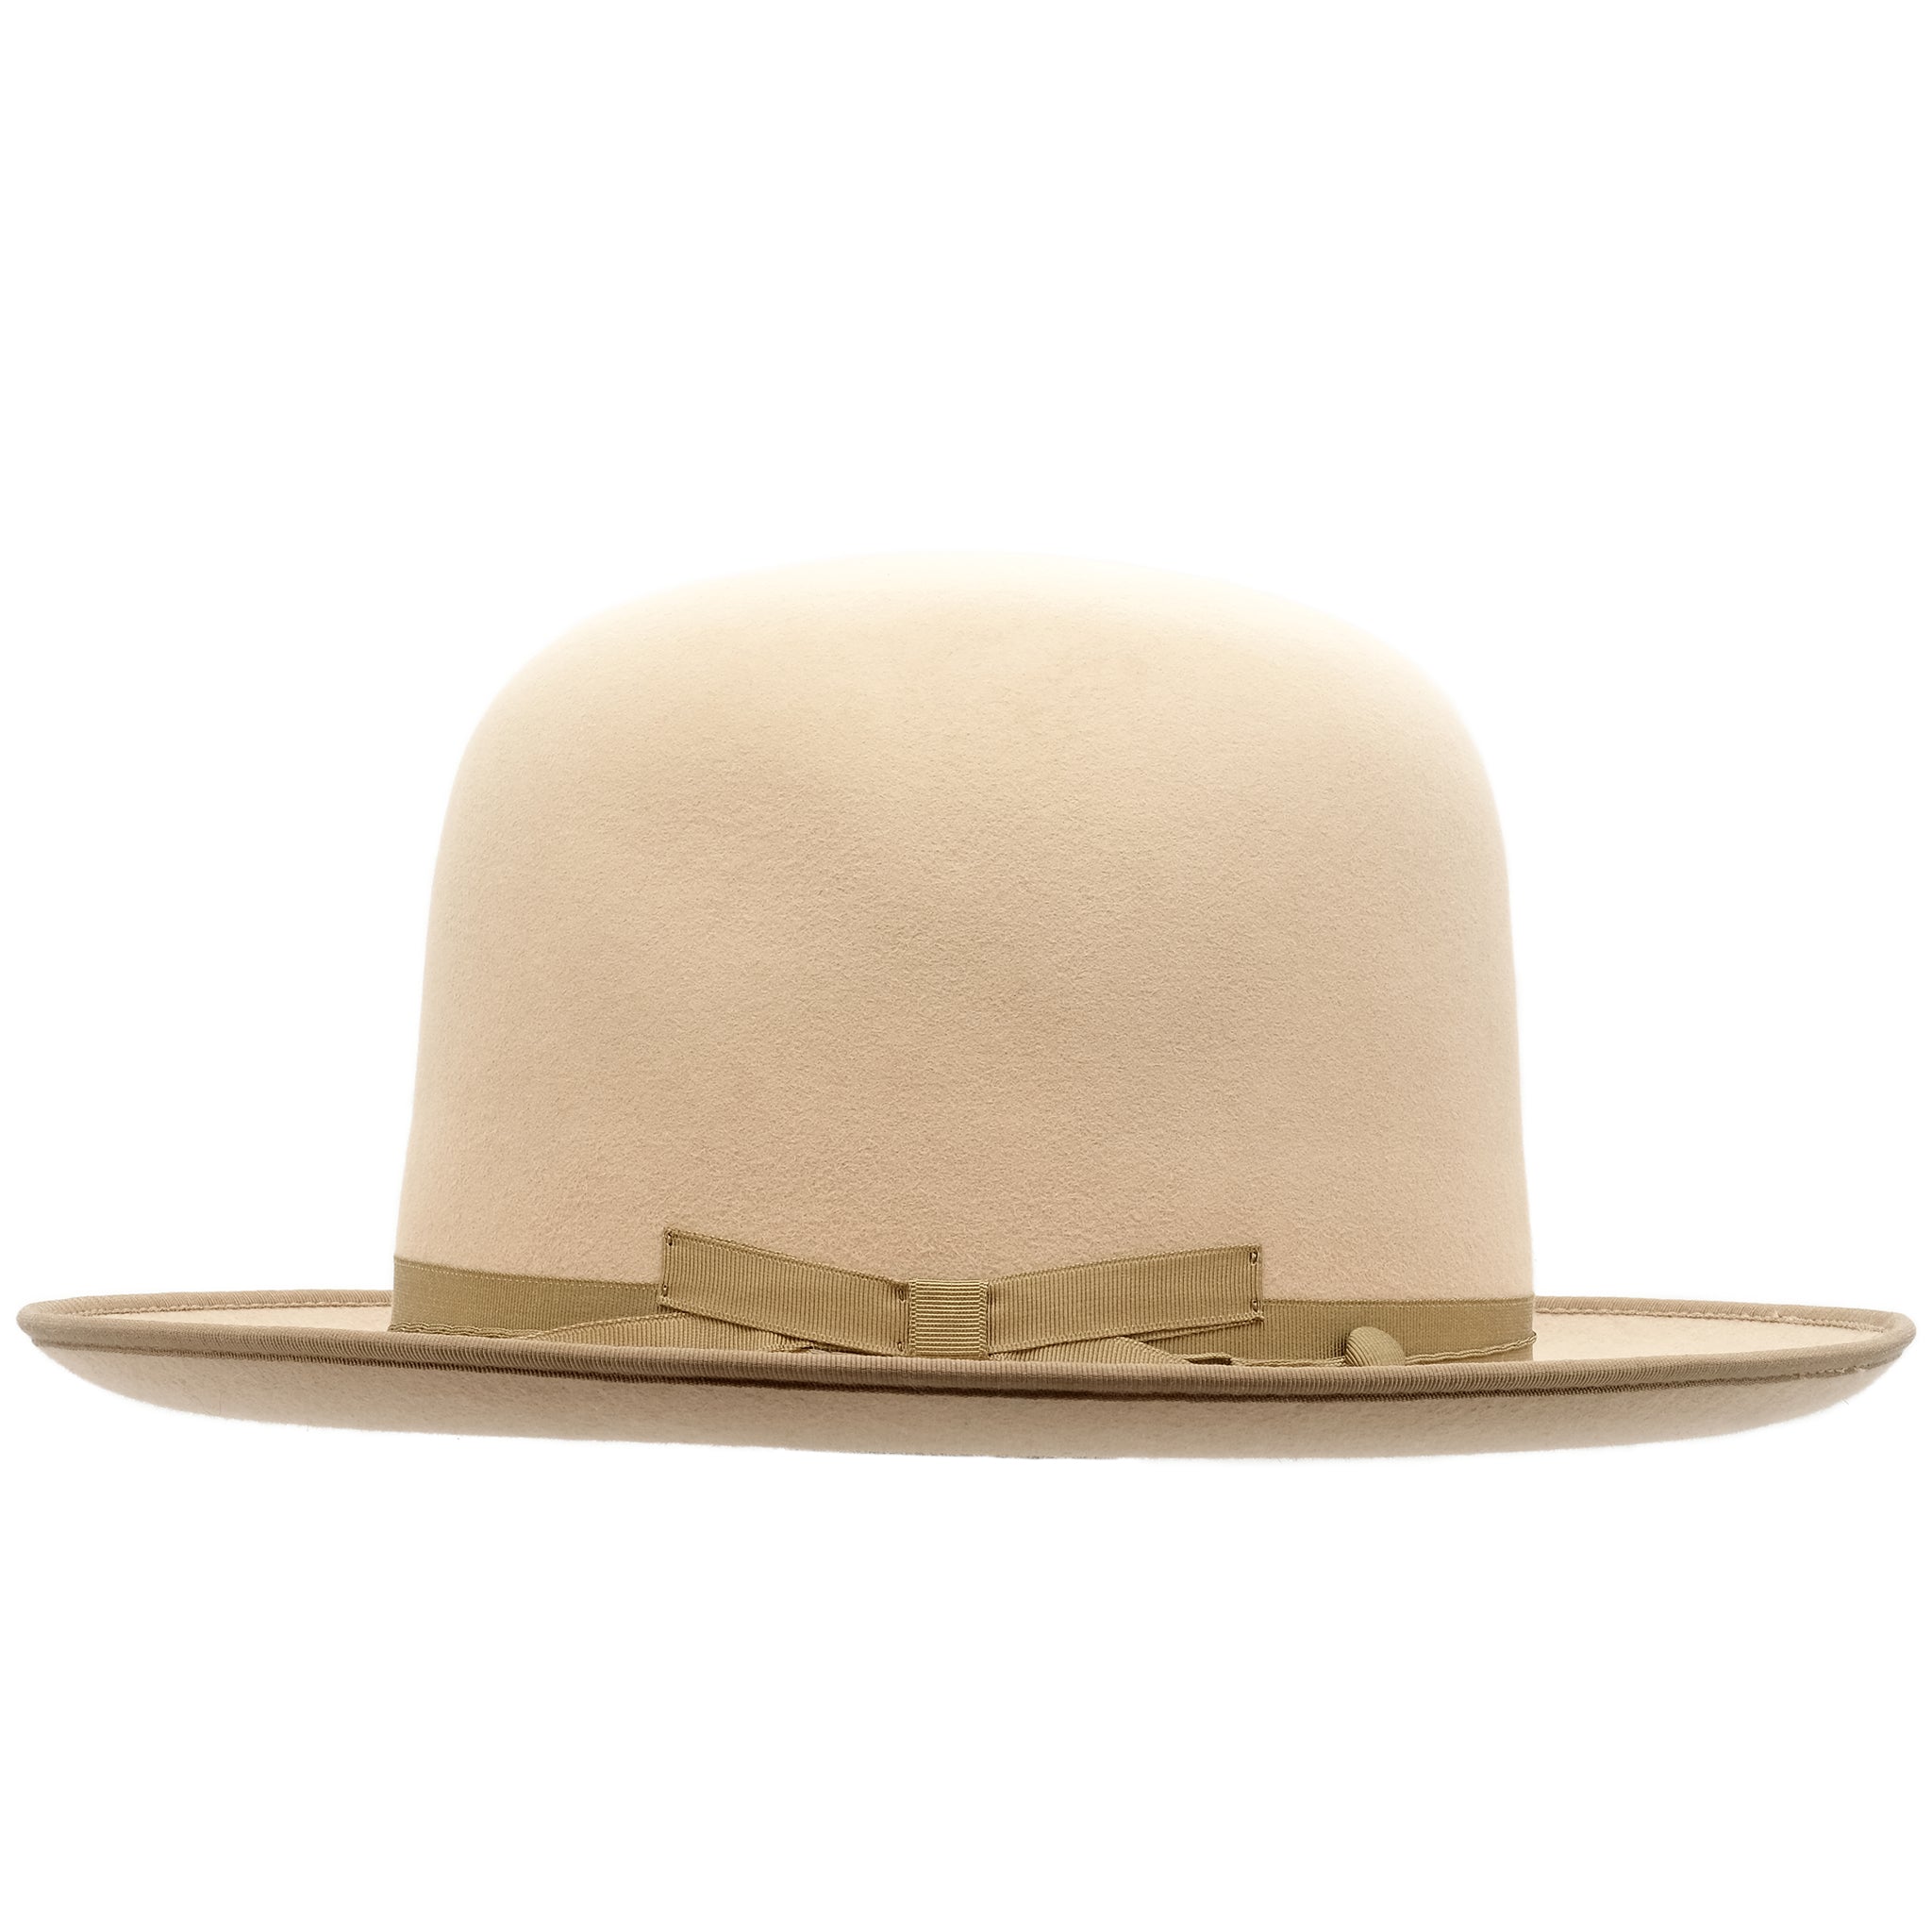 Side view of Akubra Campdraft in Silver Belly Sand colour, shown with an open crown